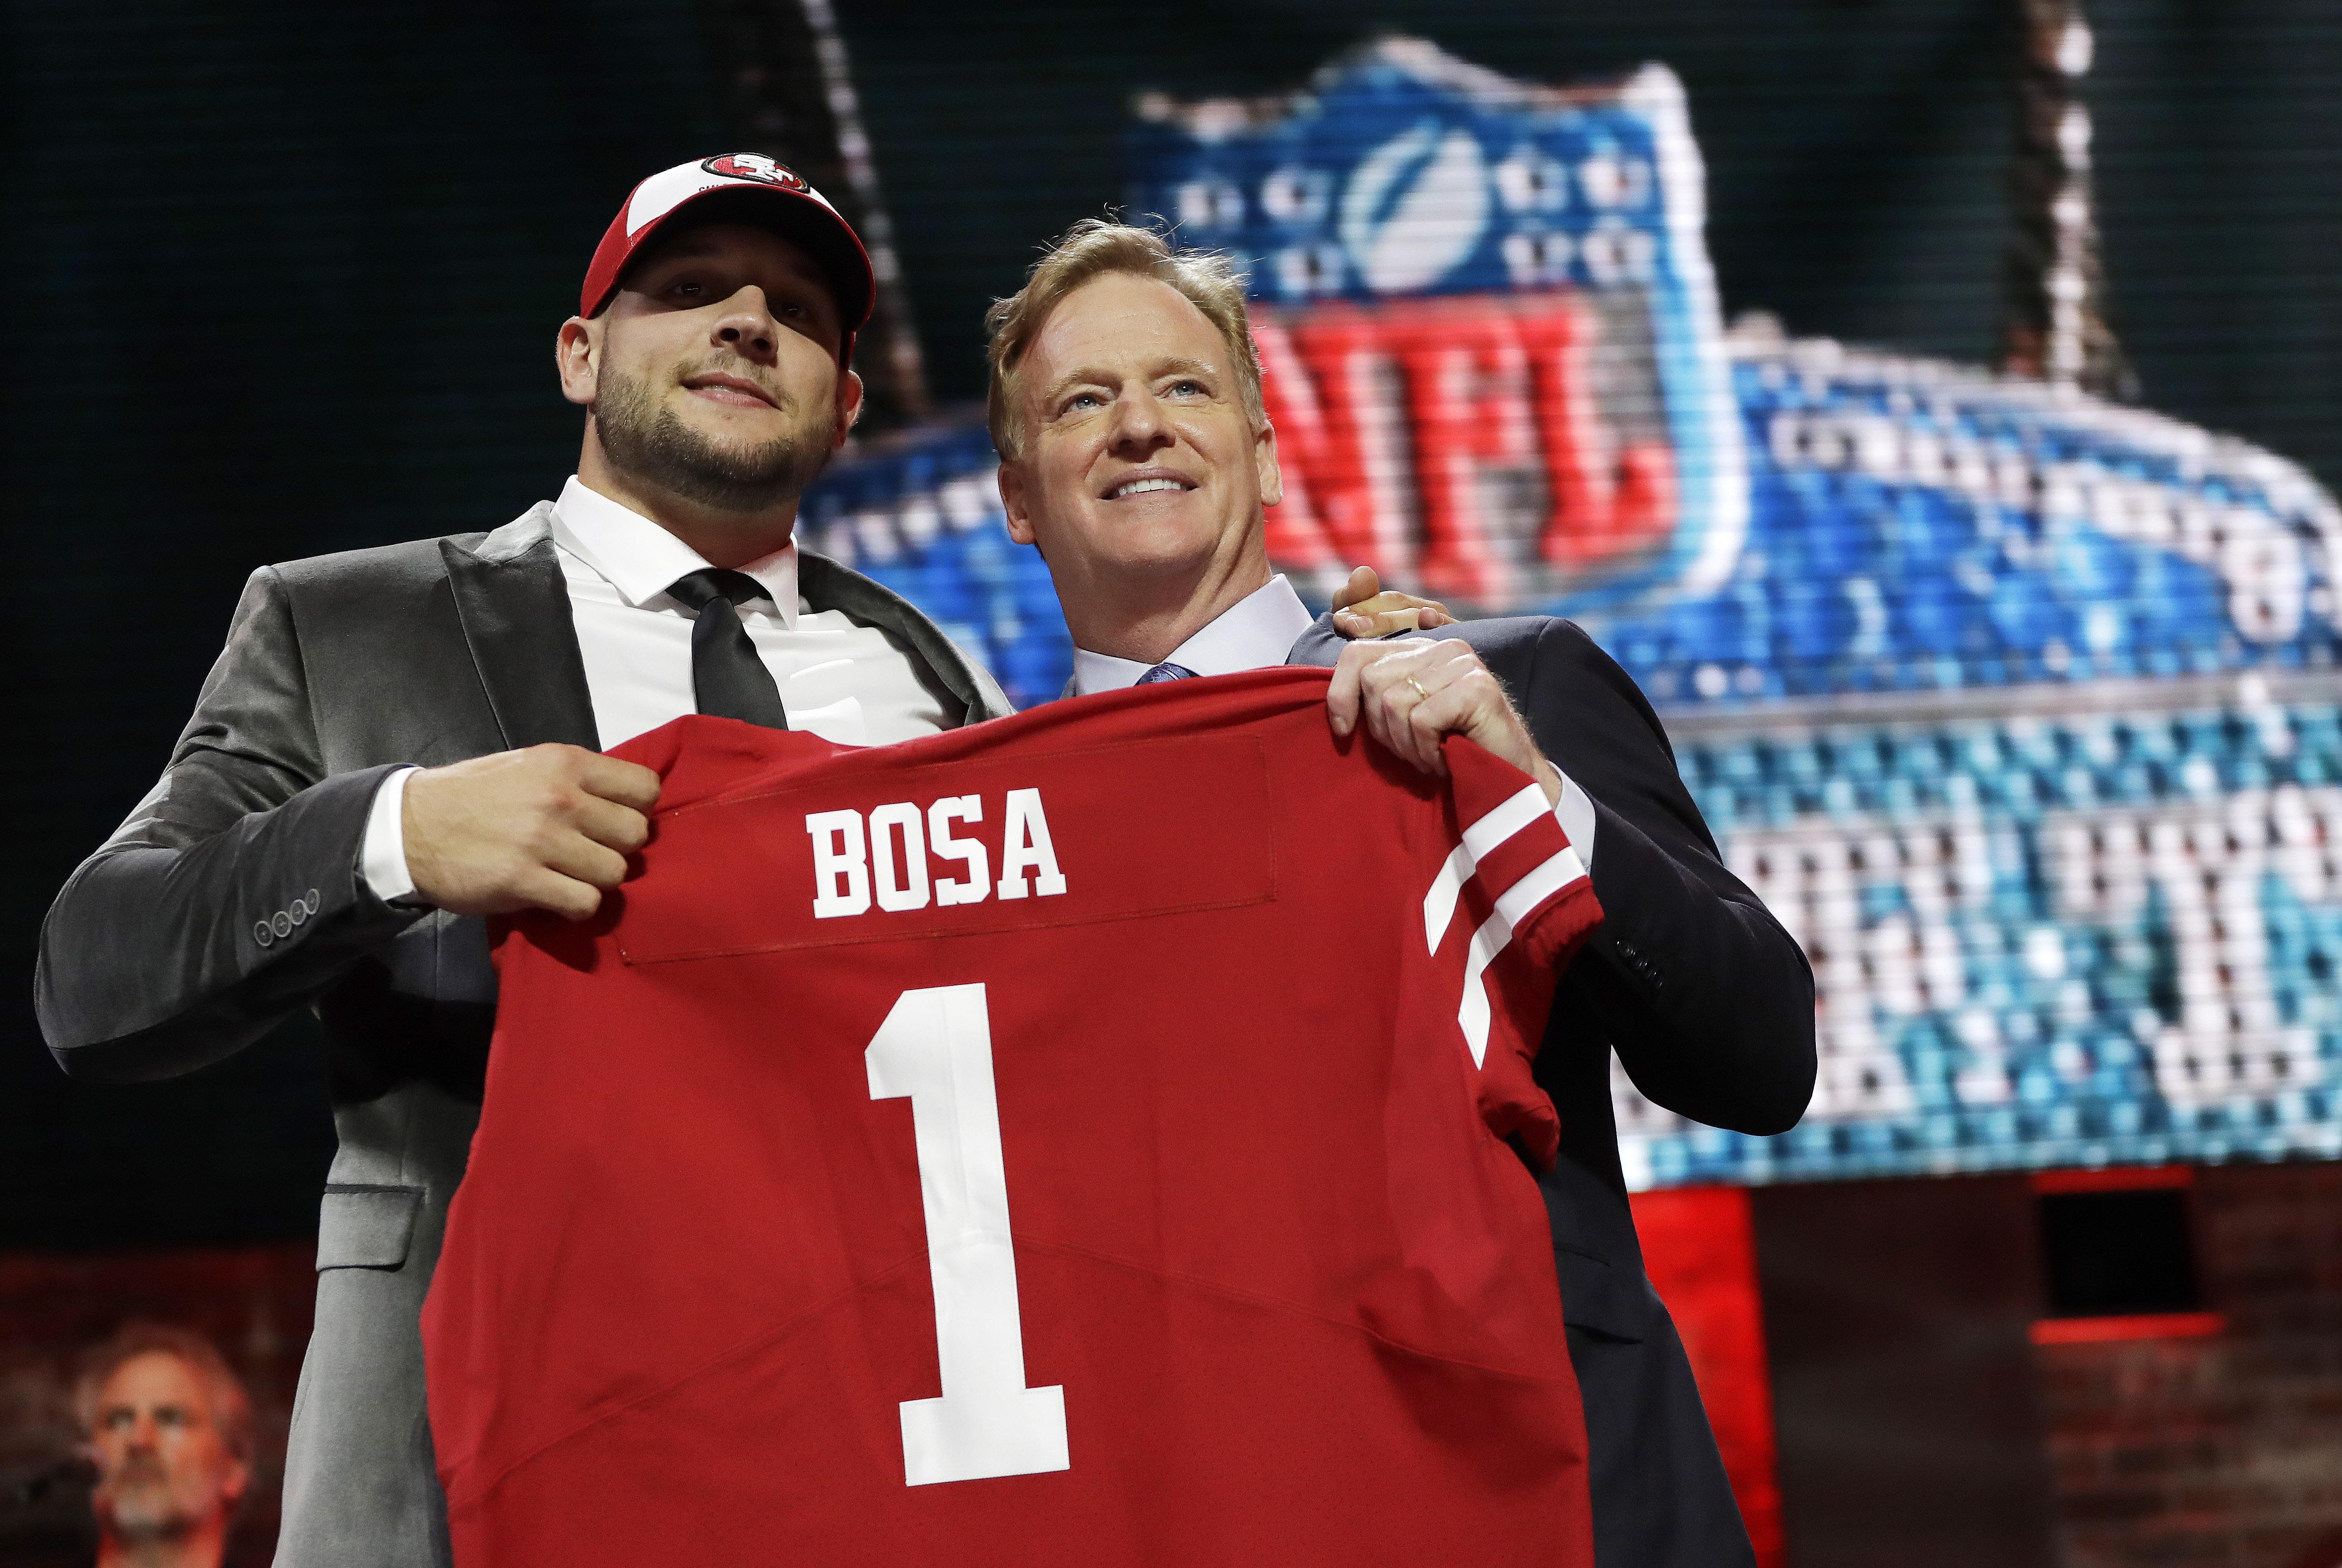 Robert Littal BSO on X: Nick Bosa Latest Likes From 2nd White